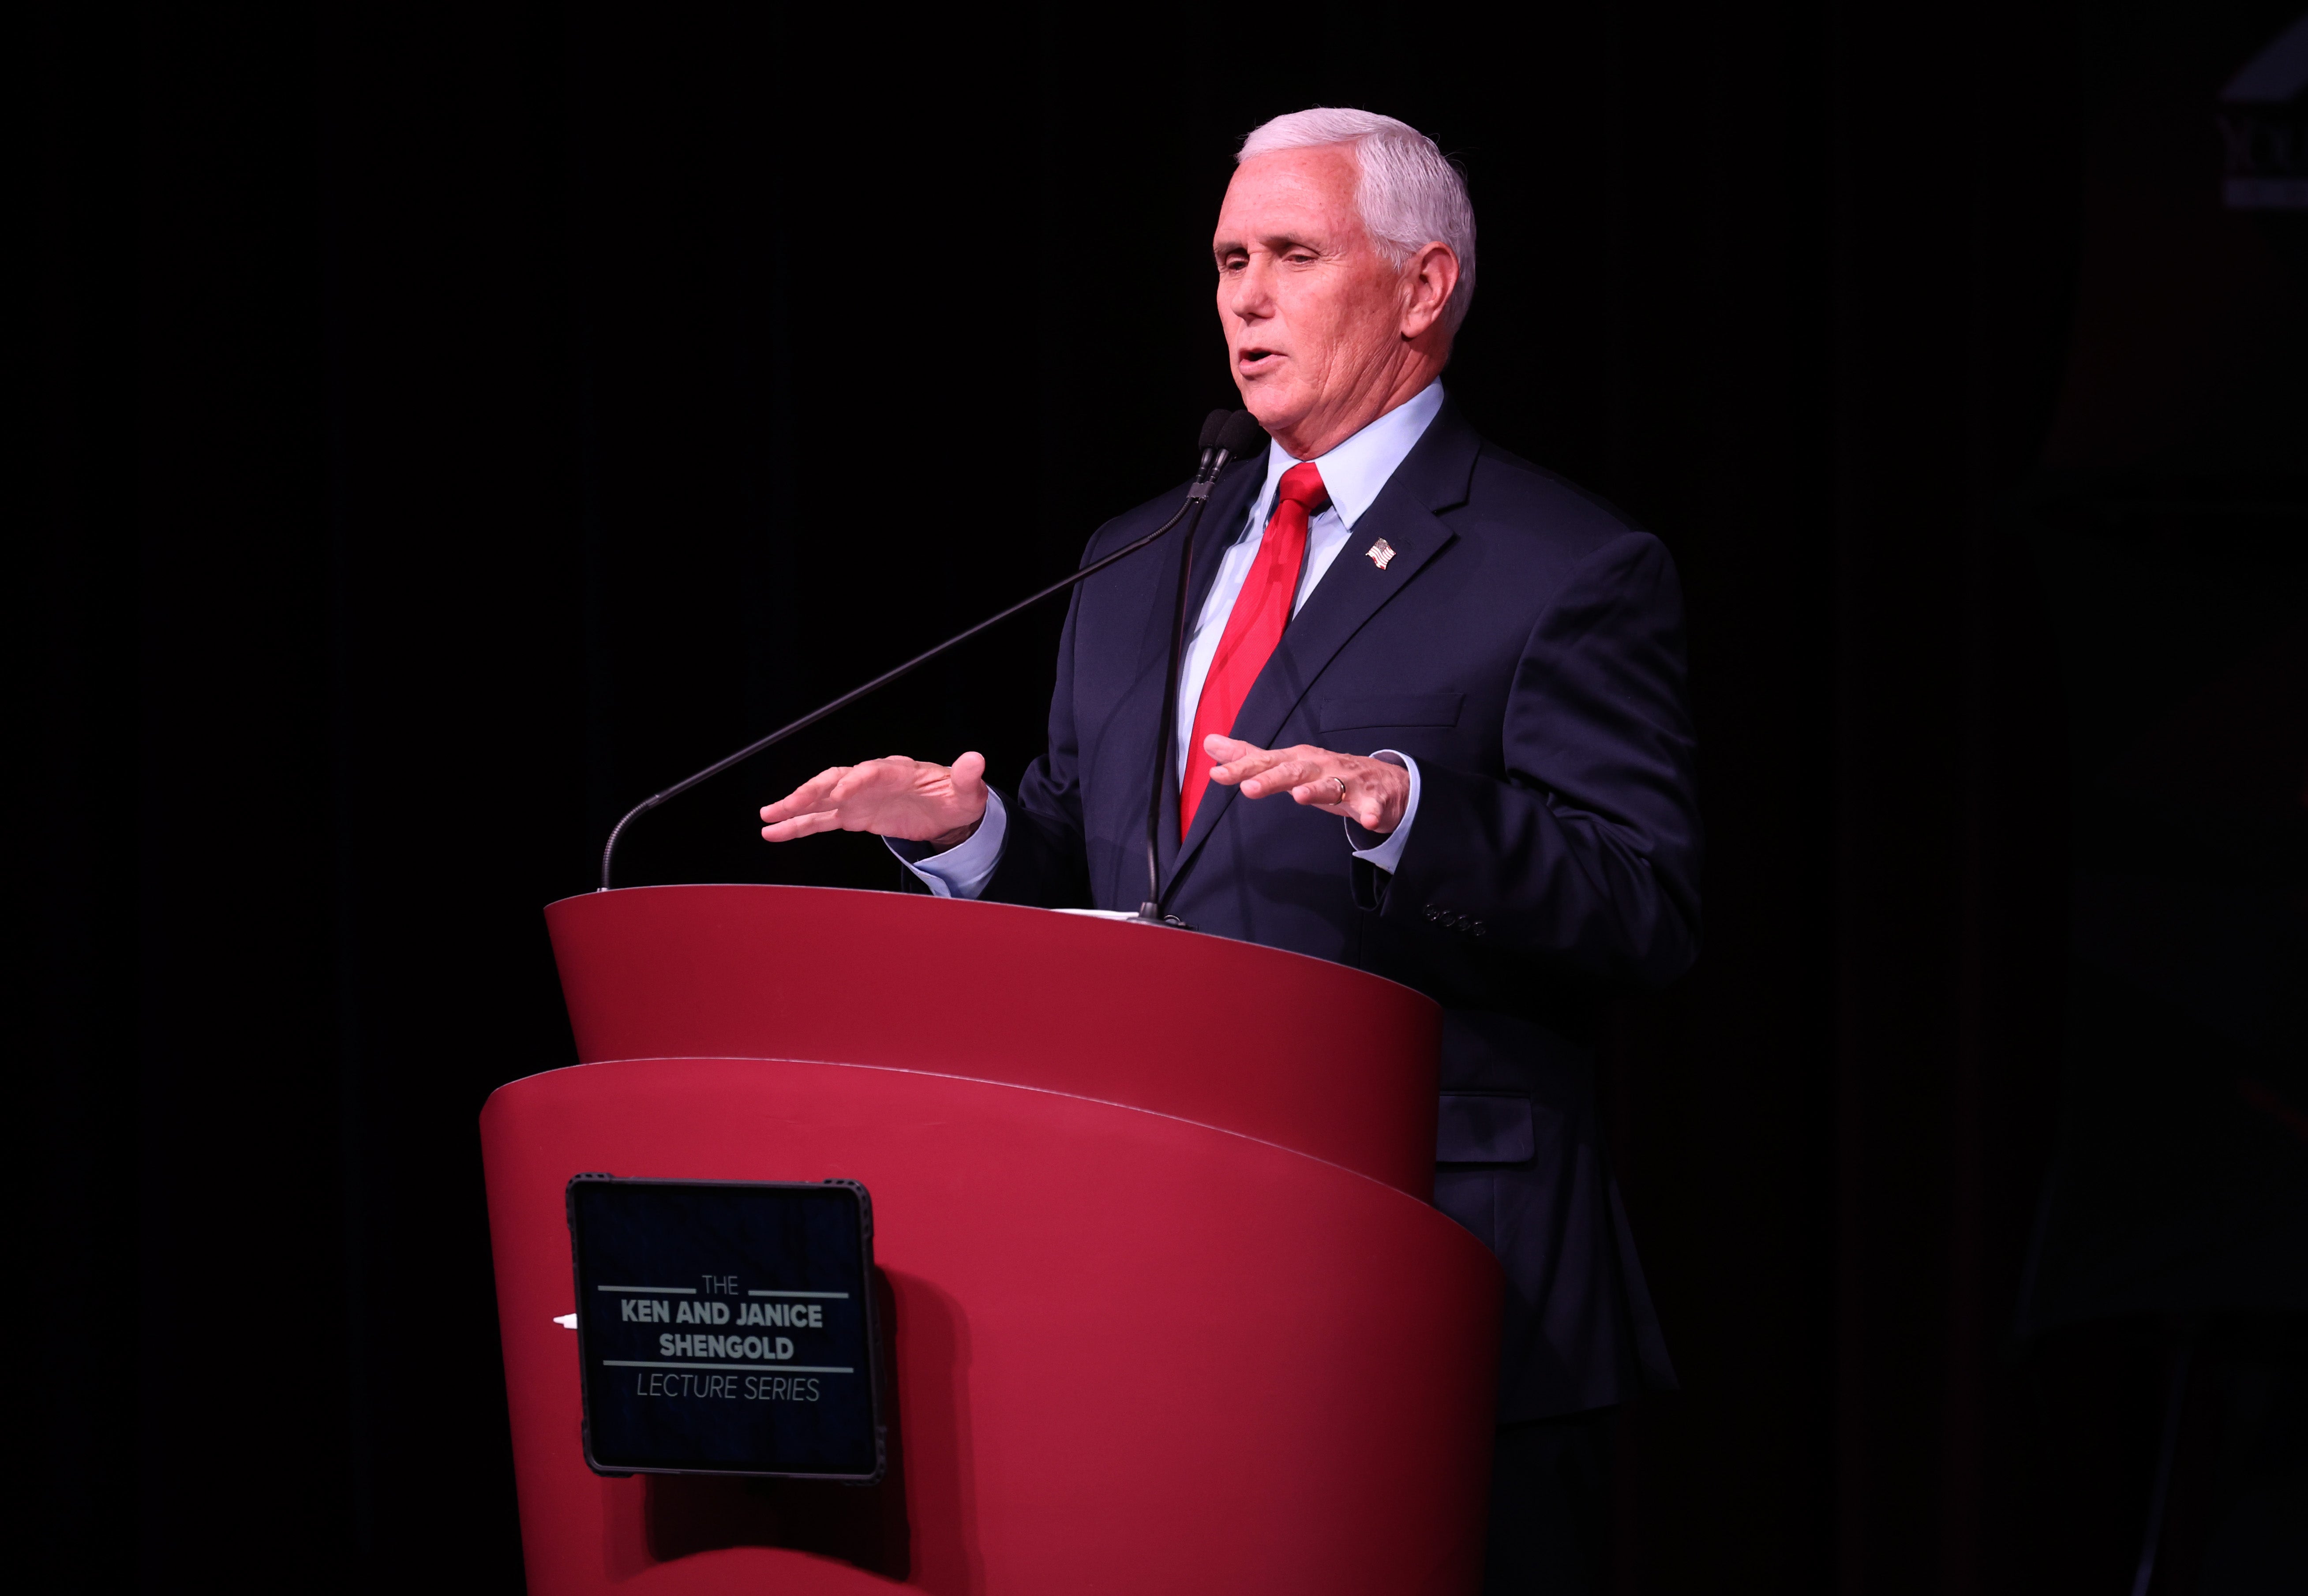 Former US vice president Mike Pence gives a lecture at Stanford University in California on 17 February 2022